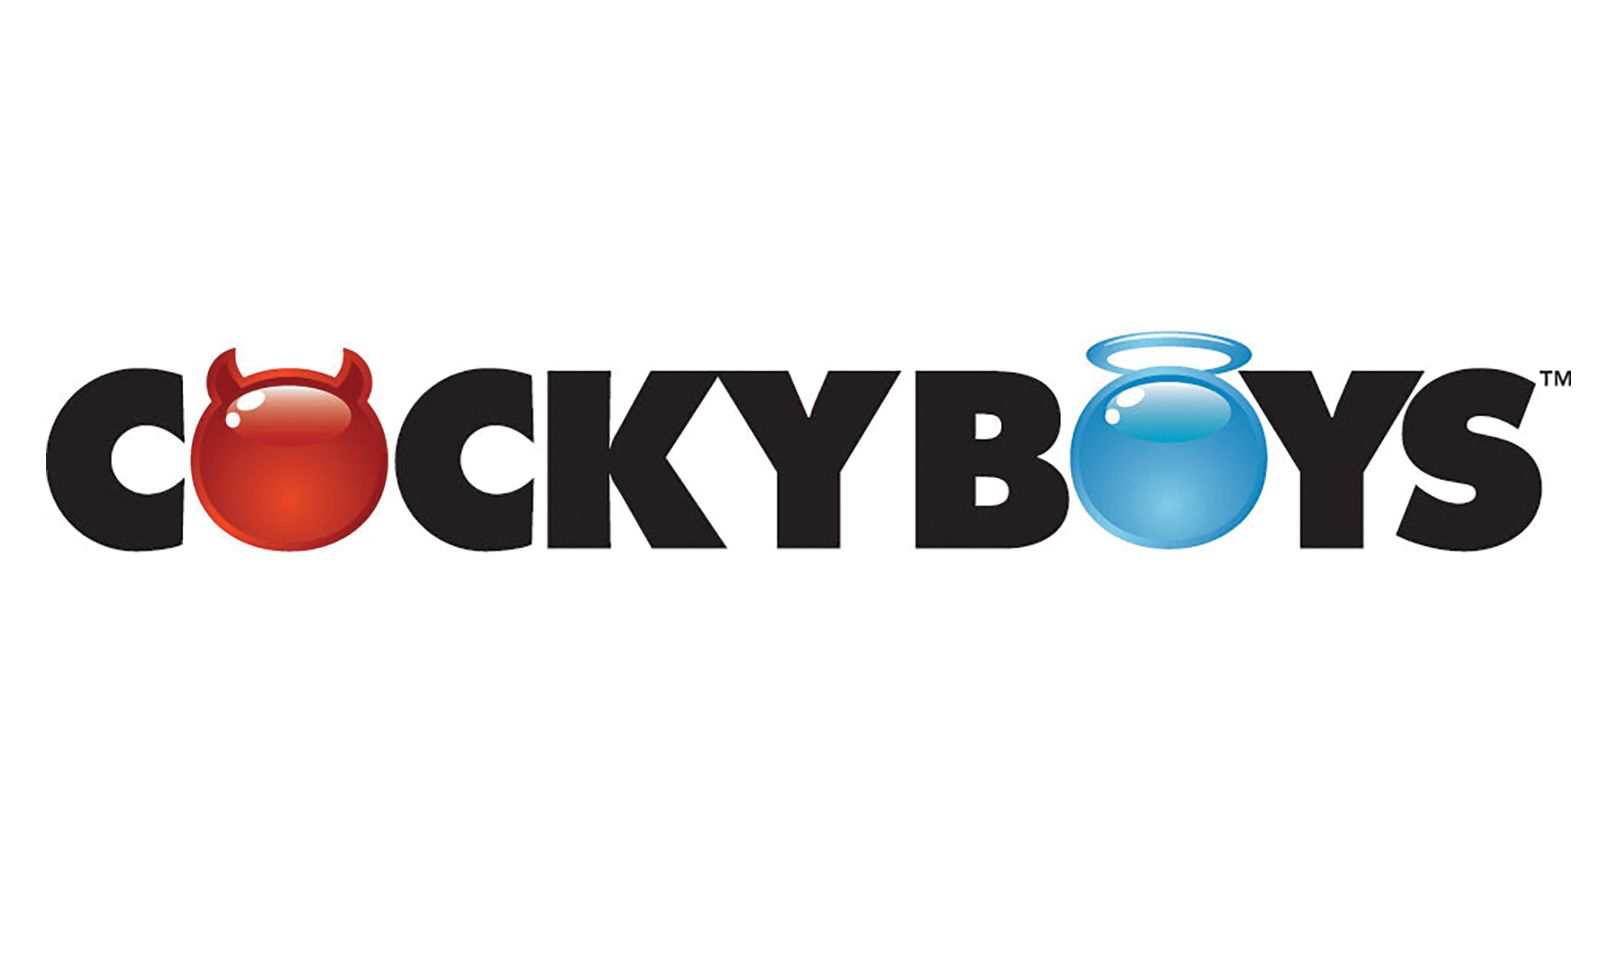 CockyBoys Adds Events to Grabby-Filled Week(end)